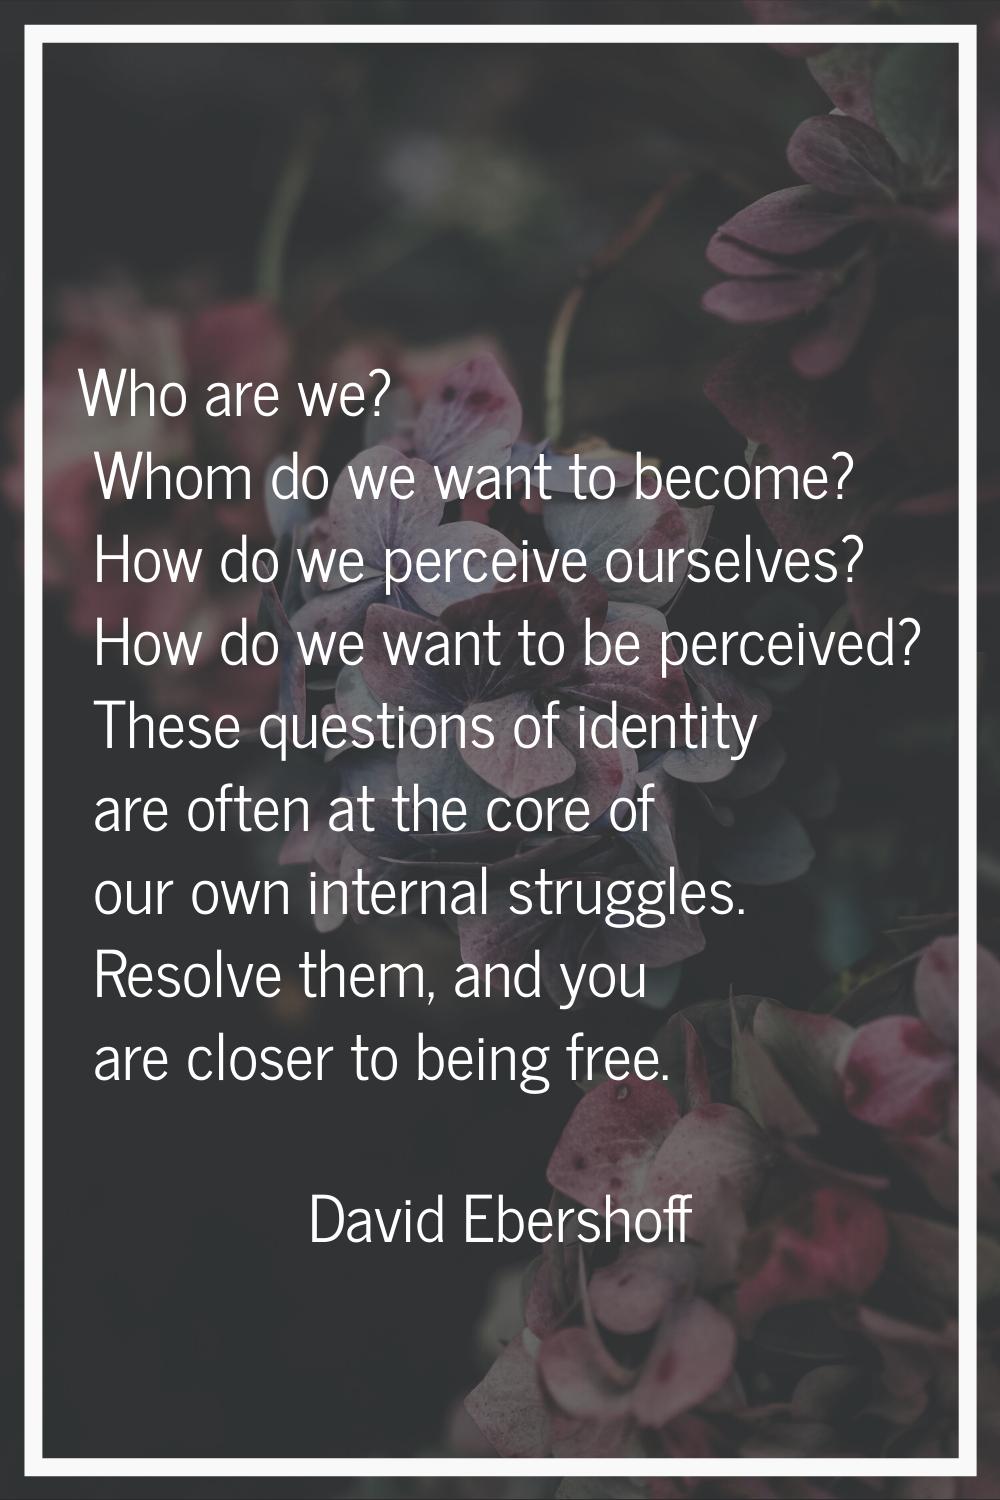 Who are we? Whom do we want to become? How do we perceive ourselves? How do we want to be perceived